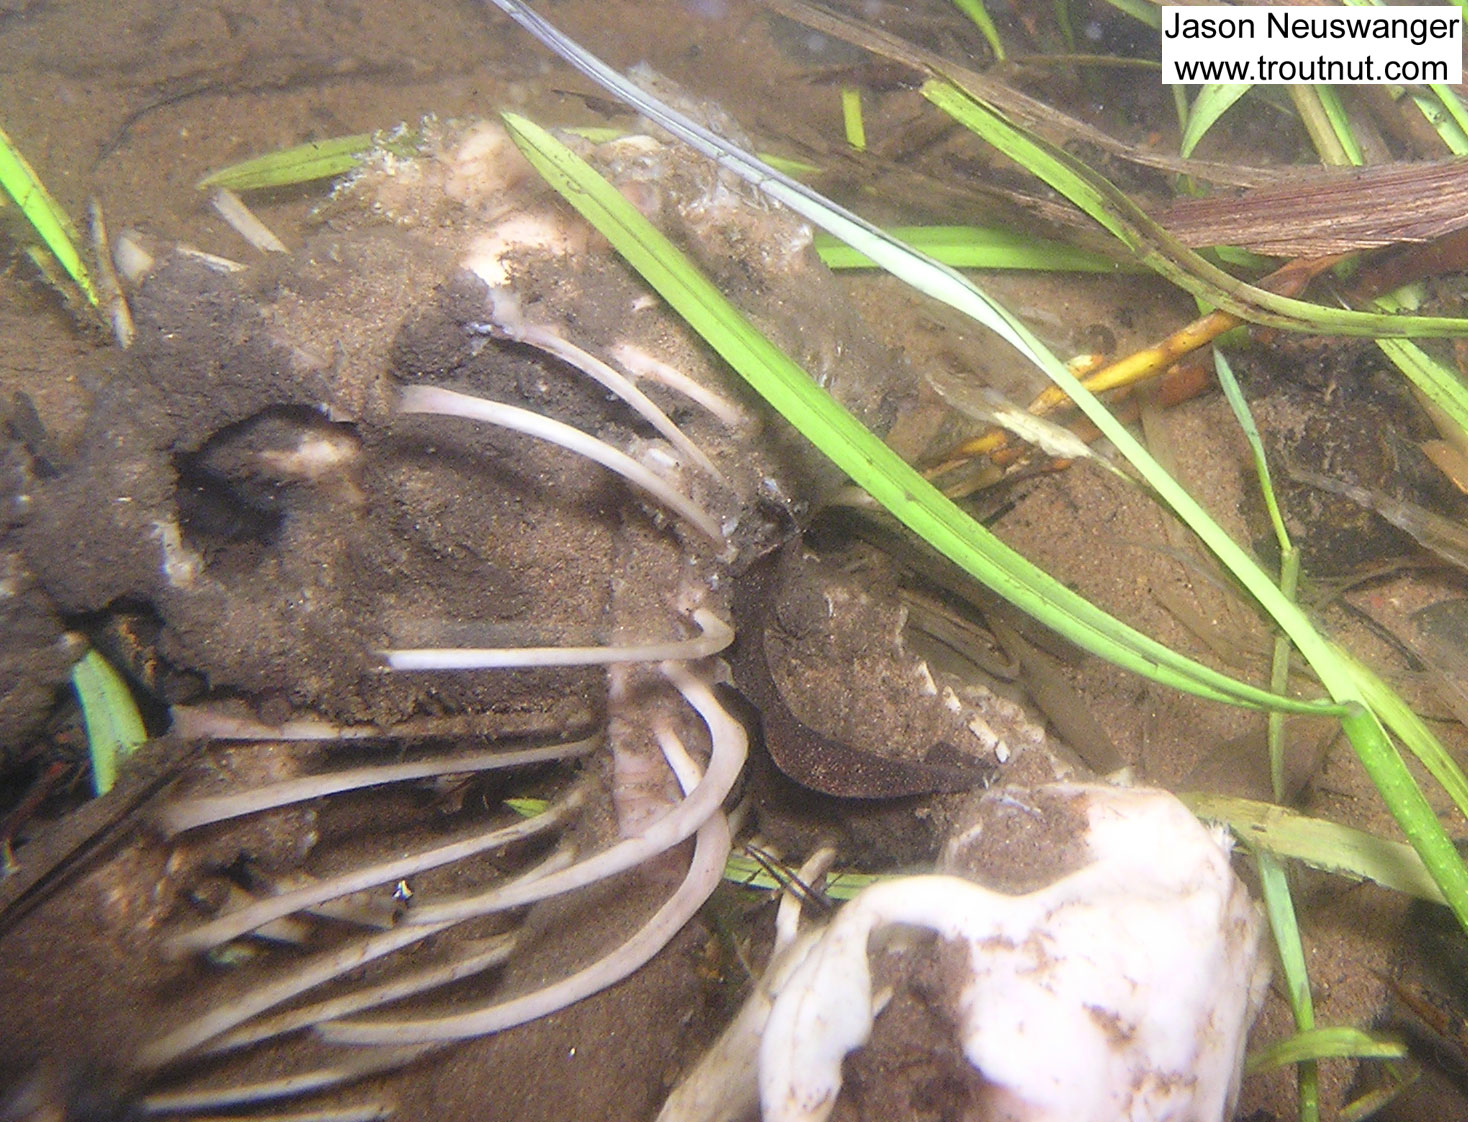 Here's the skeleton from some small mammal whose grave was a trout stream. From the Namekagon River in Wisconsin.